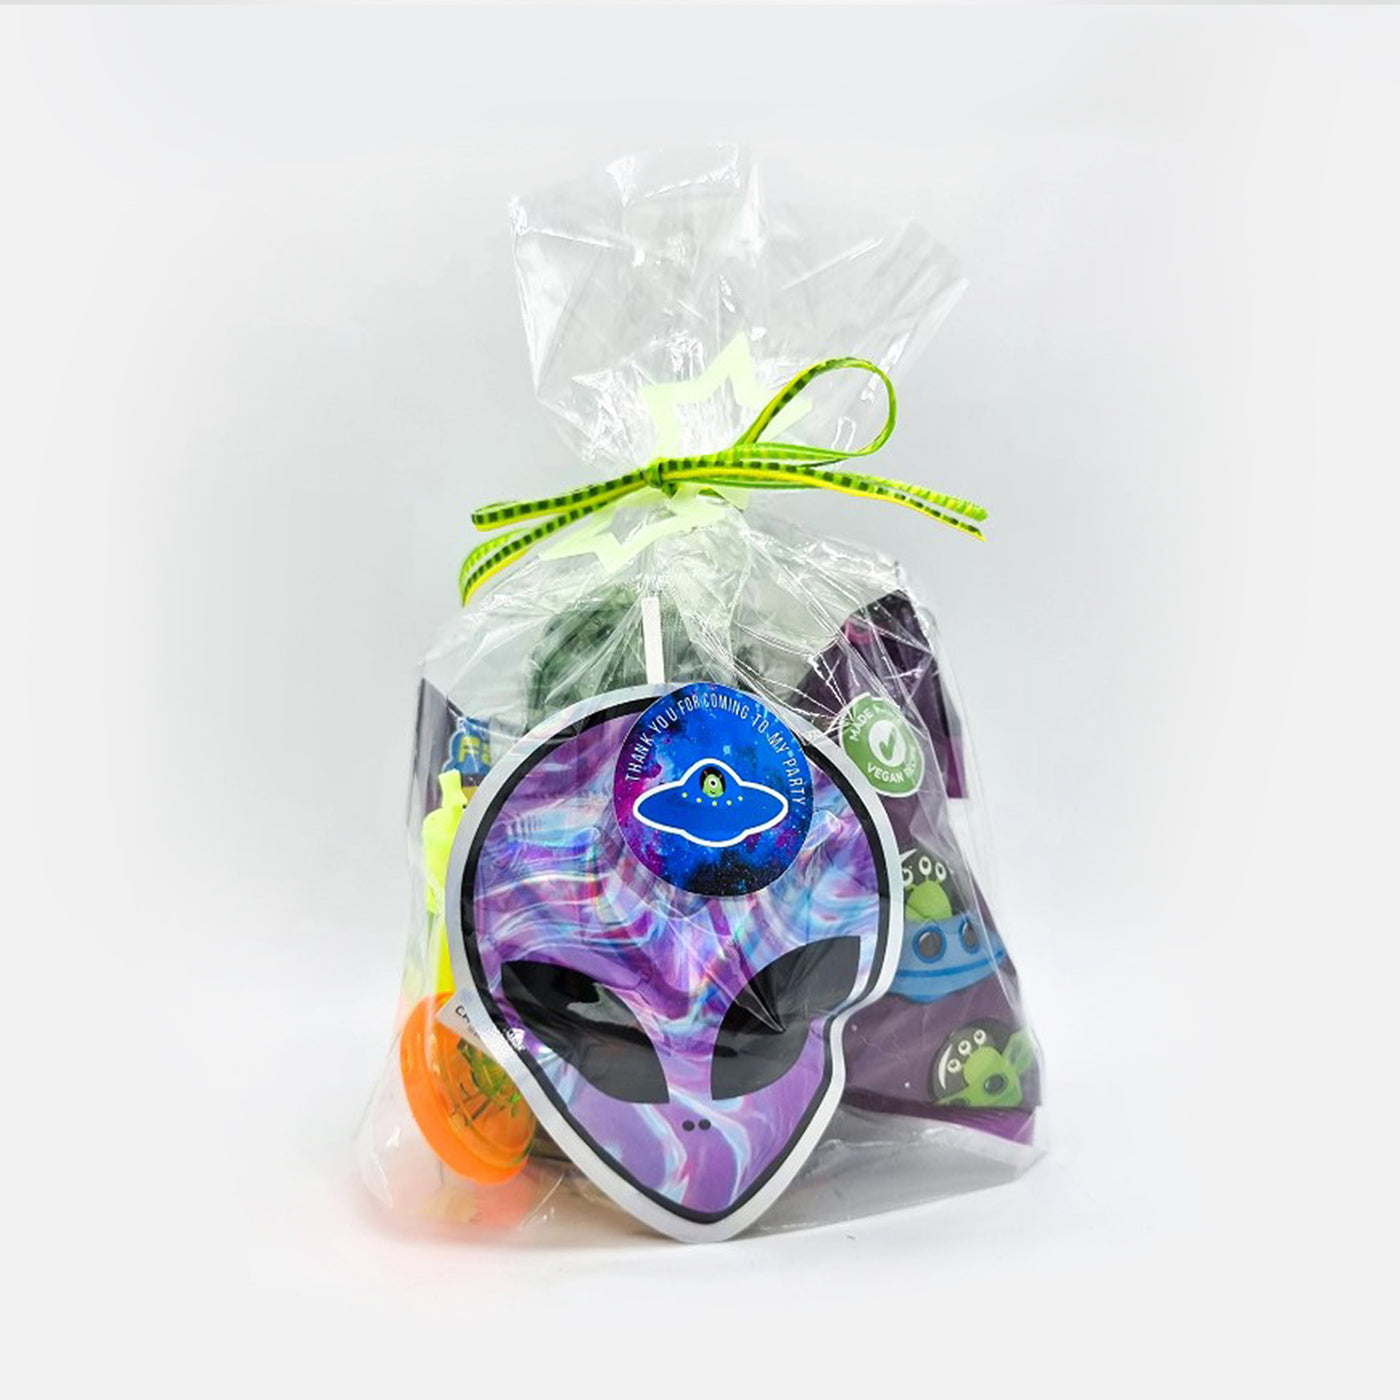 Pre Filled Space Alien Birthday Party Goody Bags With Alien Toys, And Seets For Children.